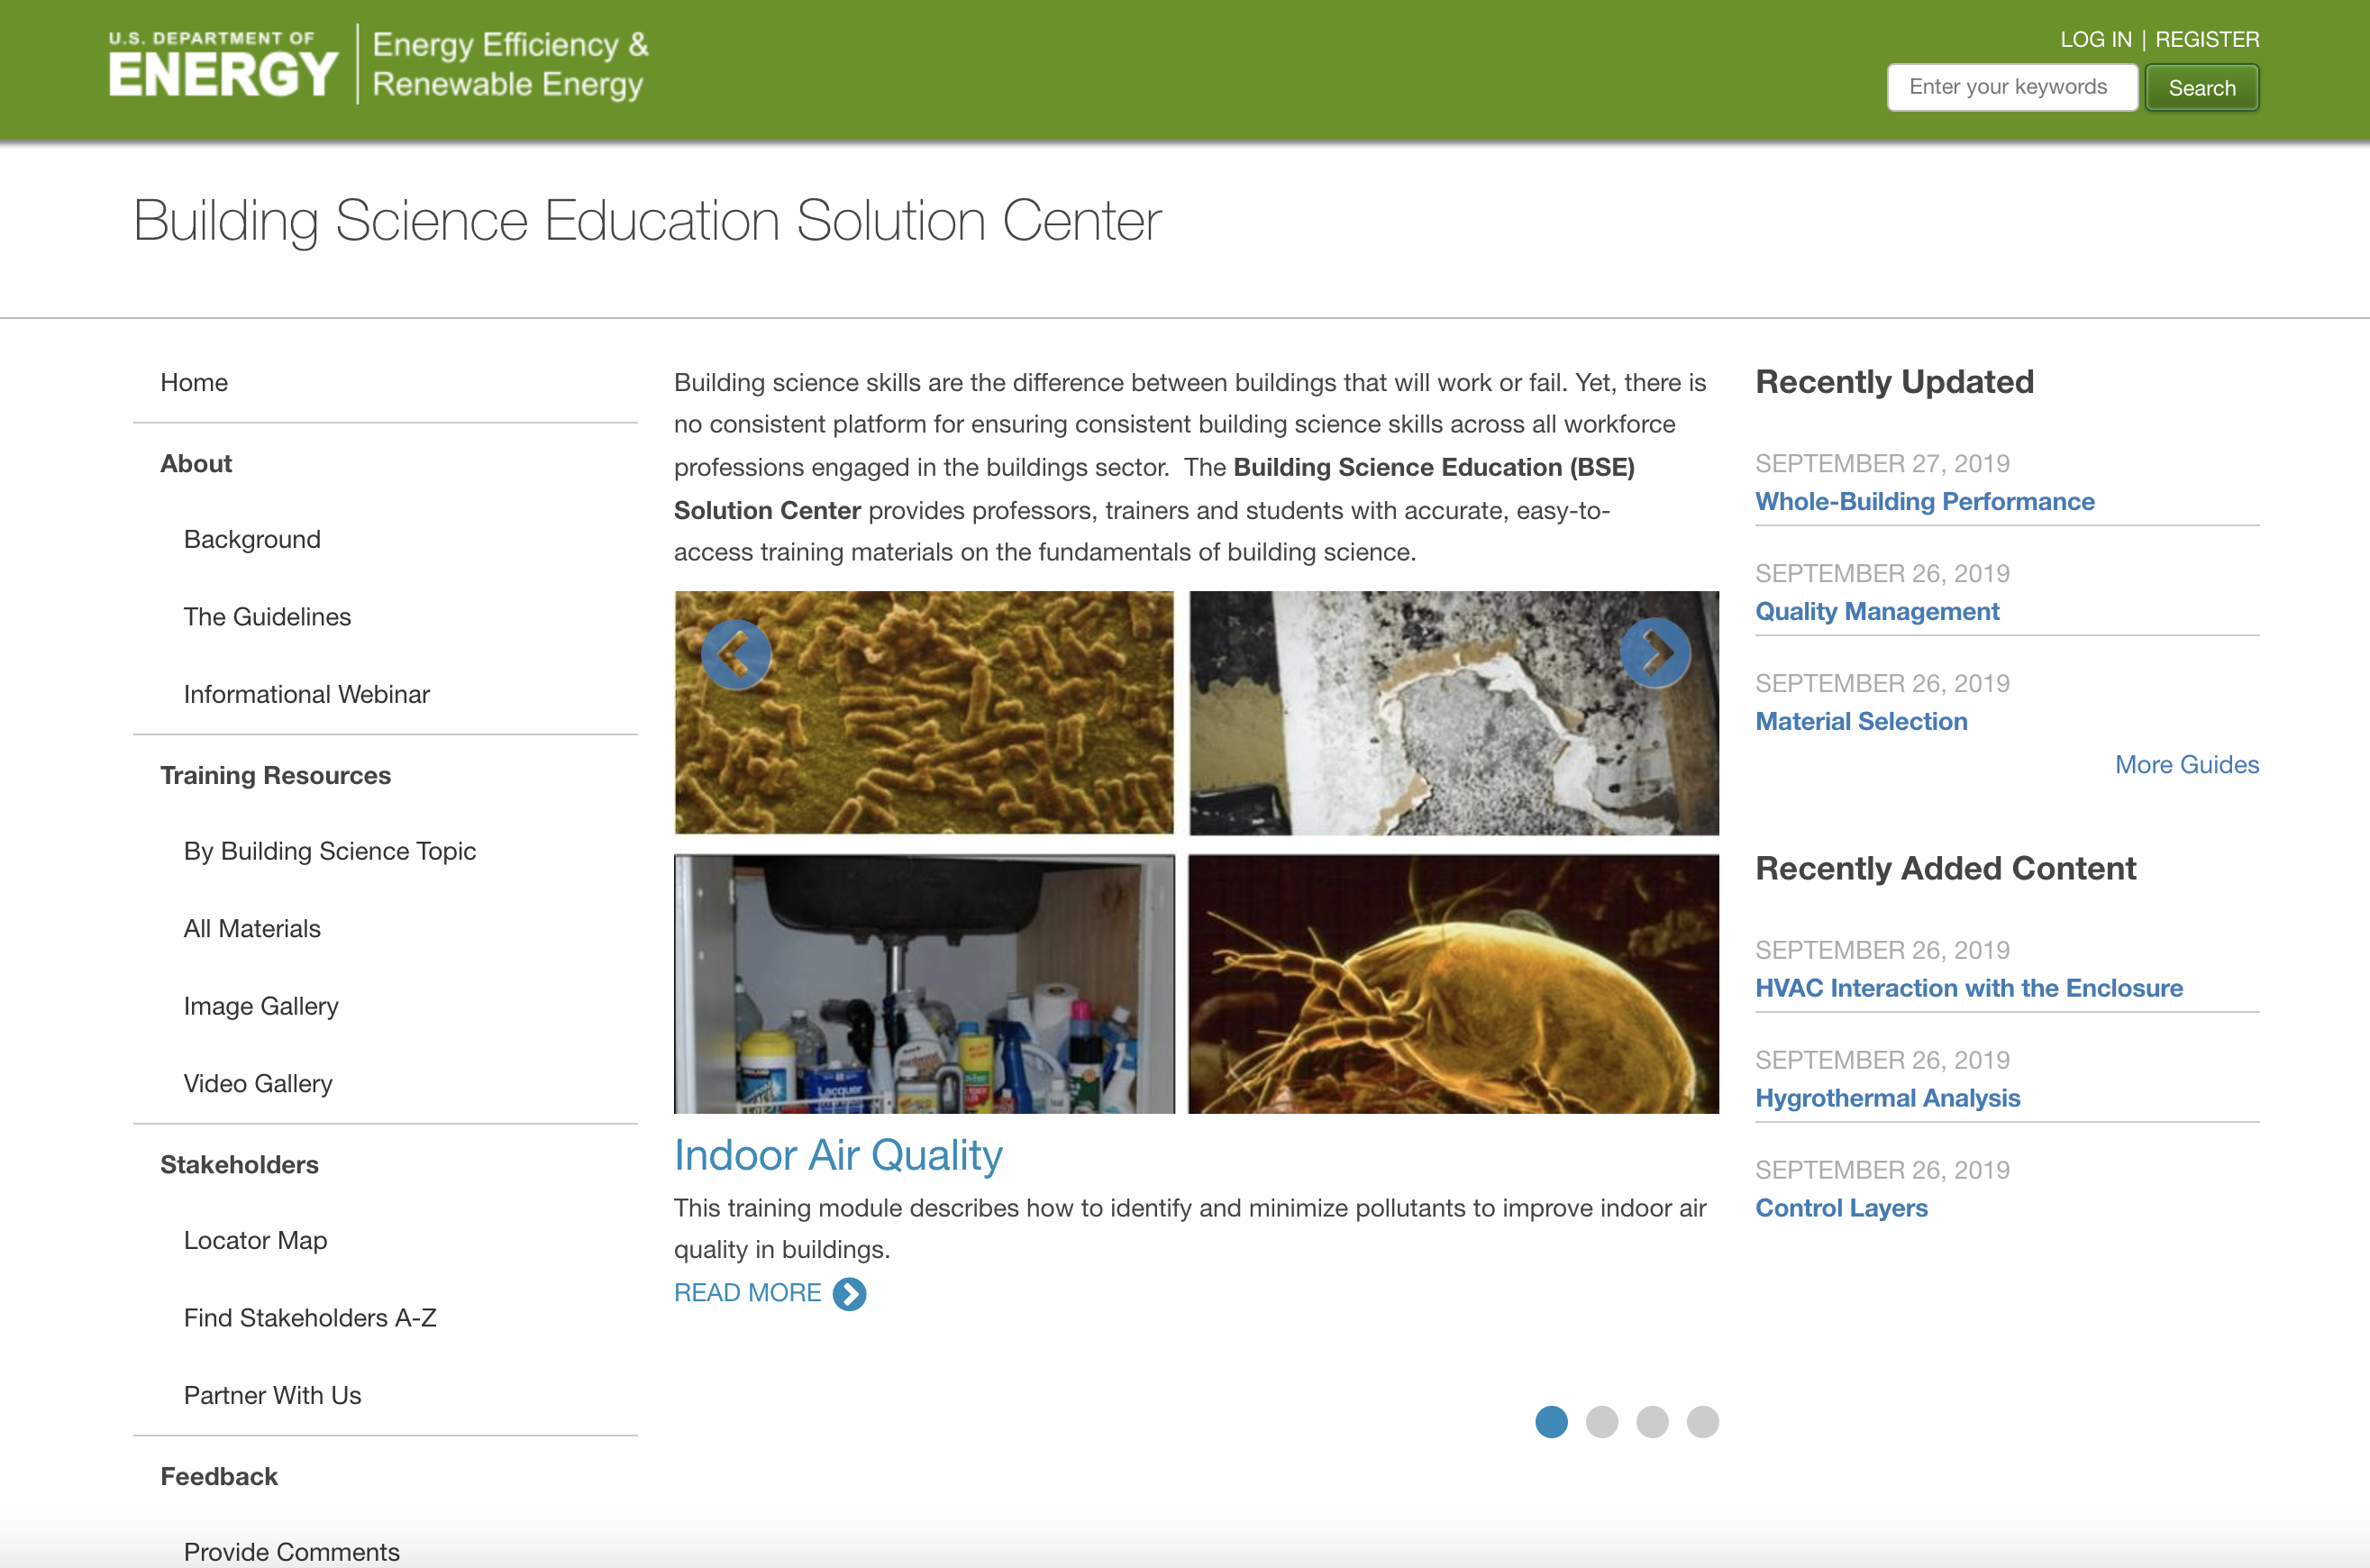 Screenshot of the Building Science Education Solution Center website.